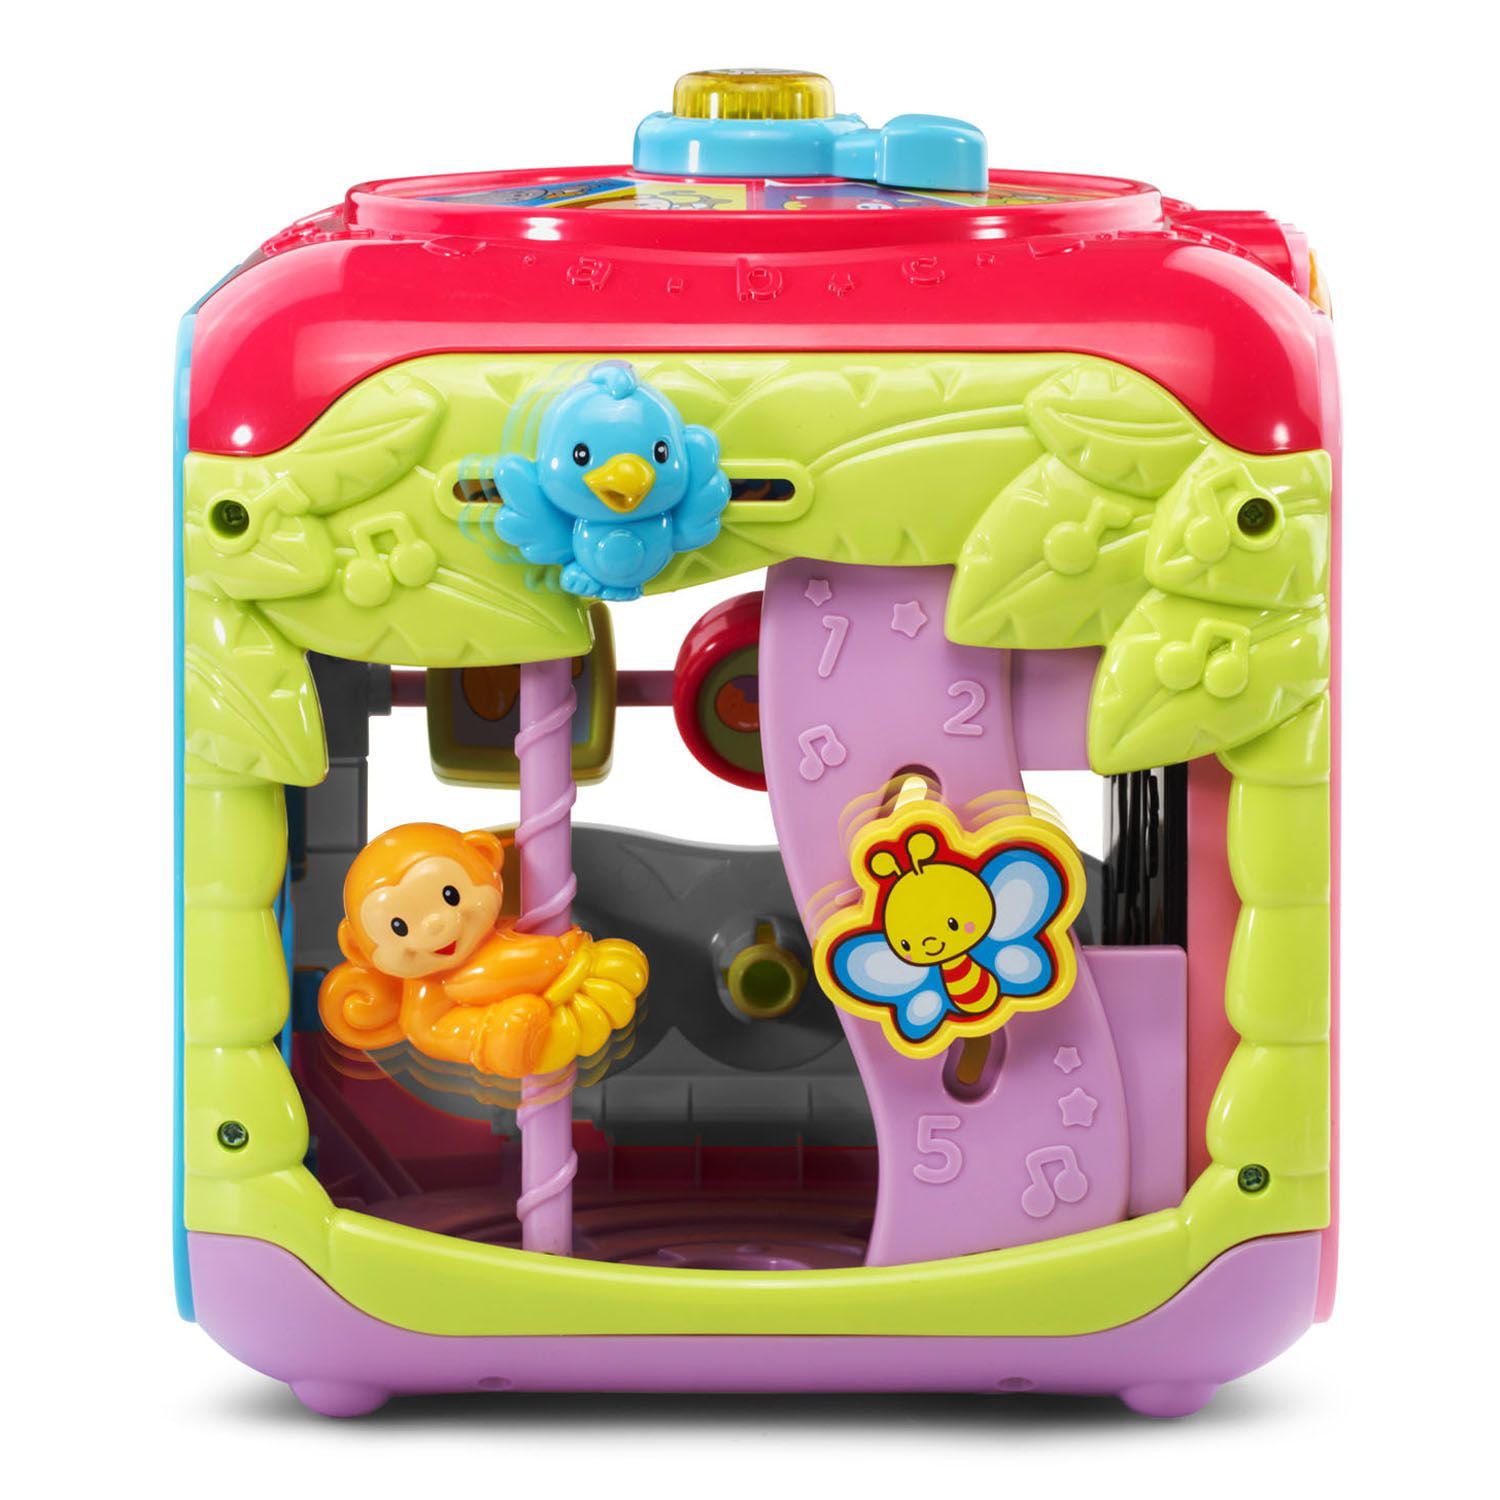 vtech sort & discover activity cube pink